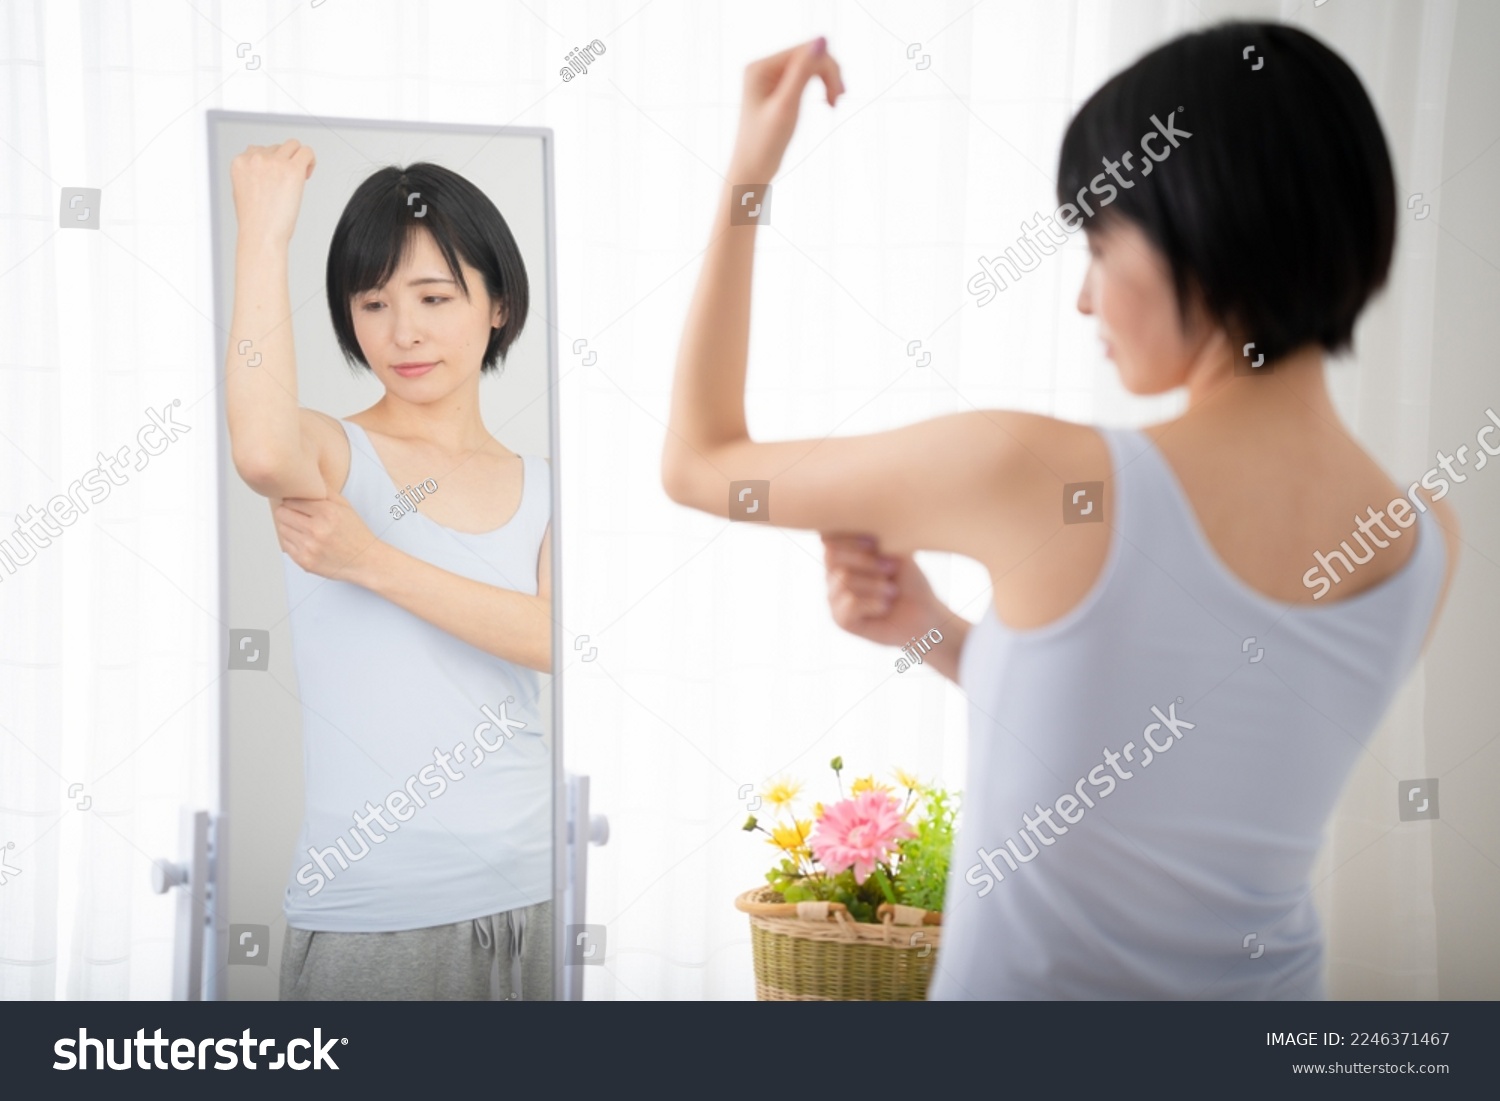 Diet image of a young woman checking her upper arm in the mirror #2246371467